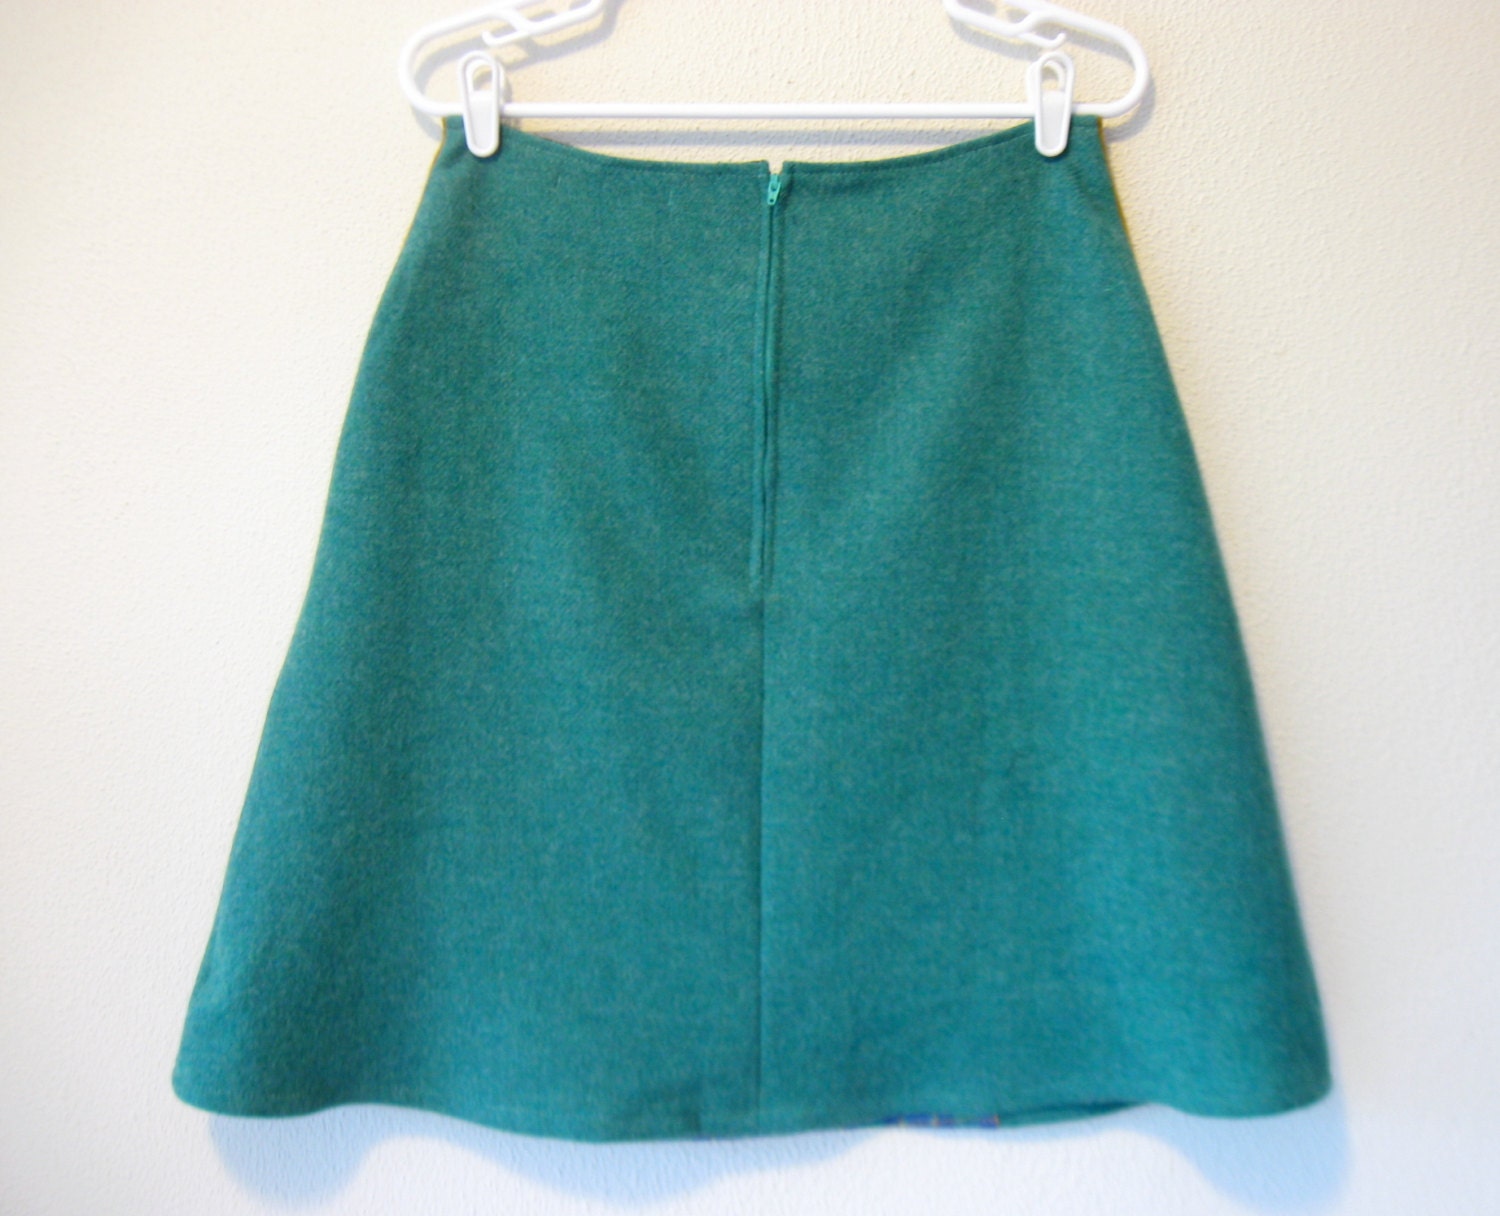 Reserved for Maricella SALE Petunia wool paneled skirt Sz 6